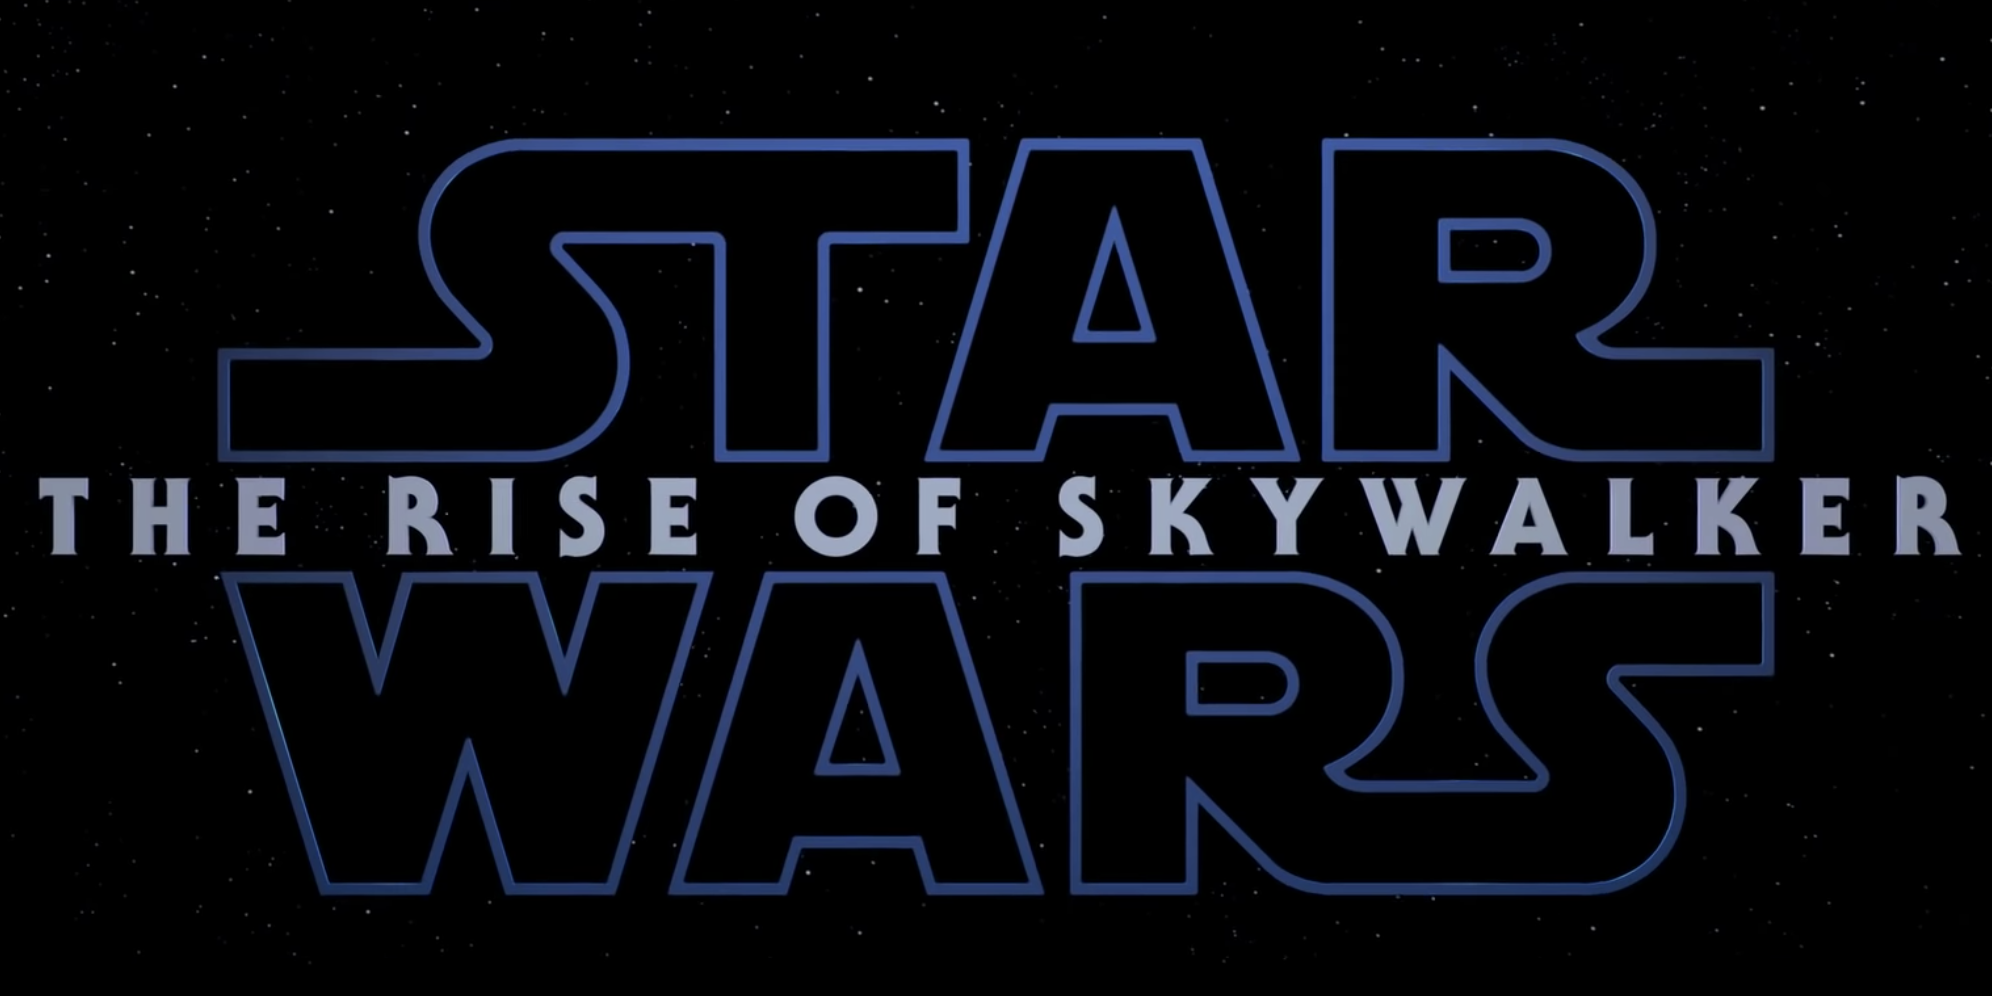 What We Know About 'Star Wars: The Rise of Skywalker' - The New